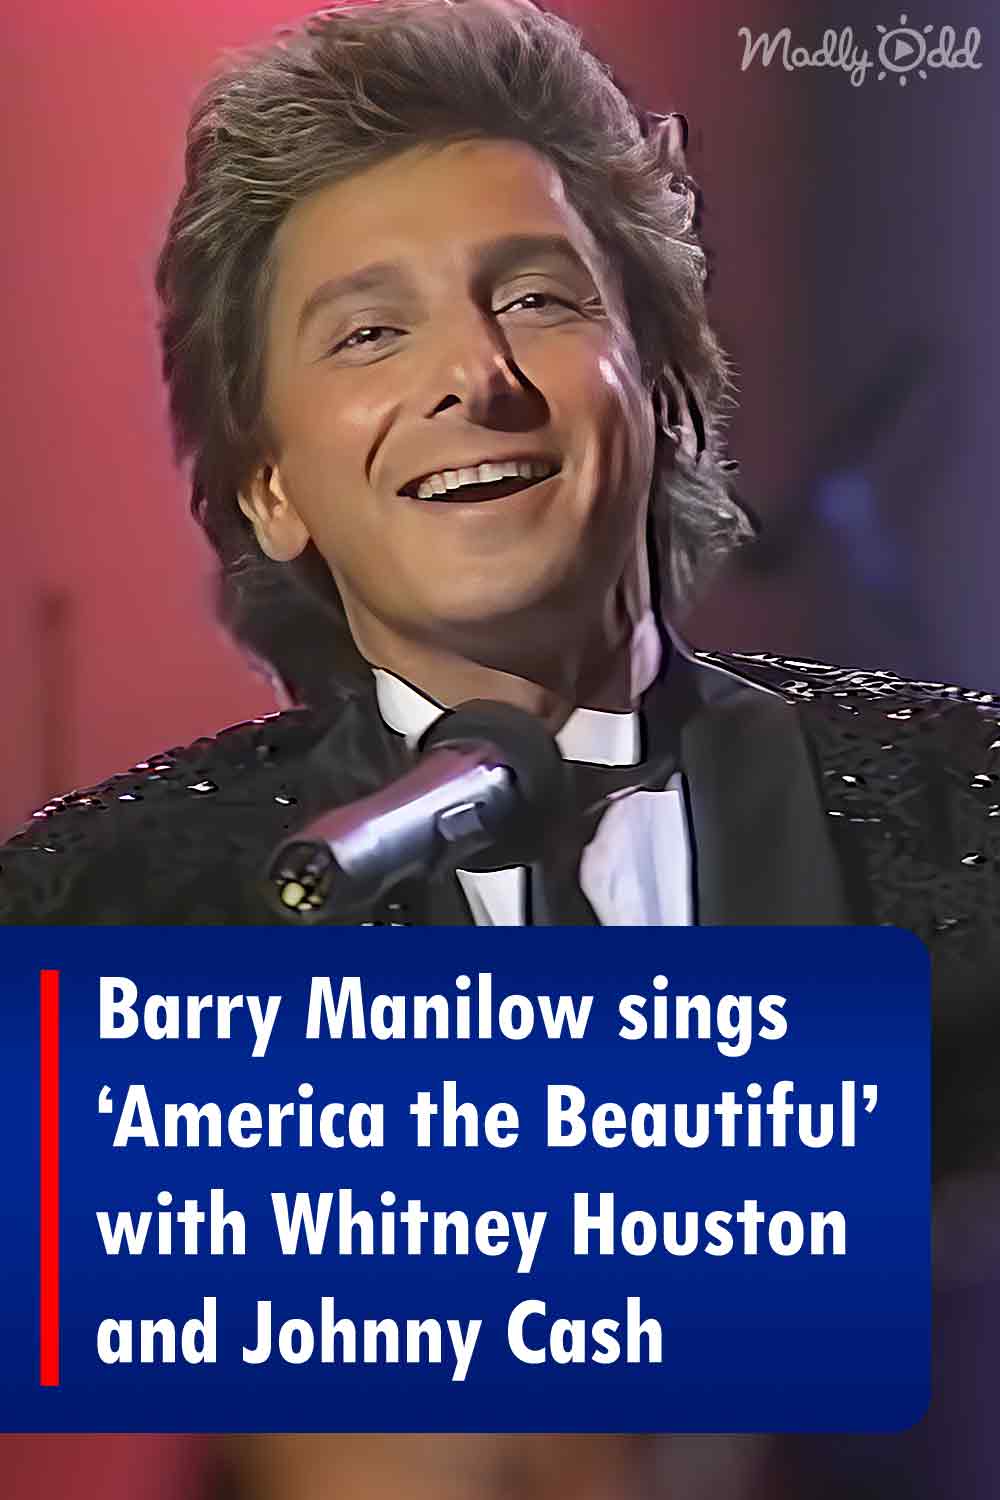 Barry Manilow sings ‘America the Beautiful’ with Whitney Houston and Johnny Cash